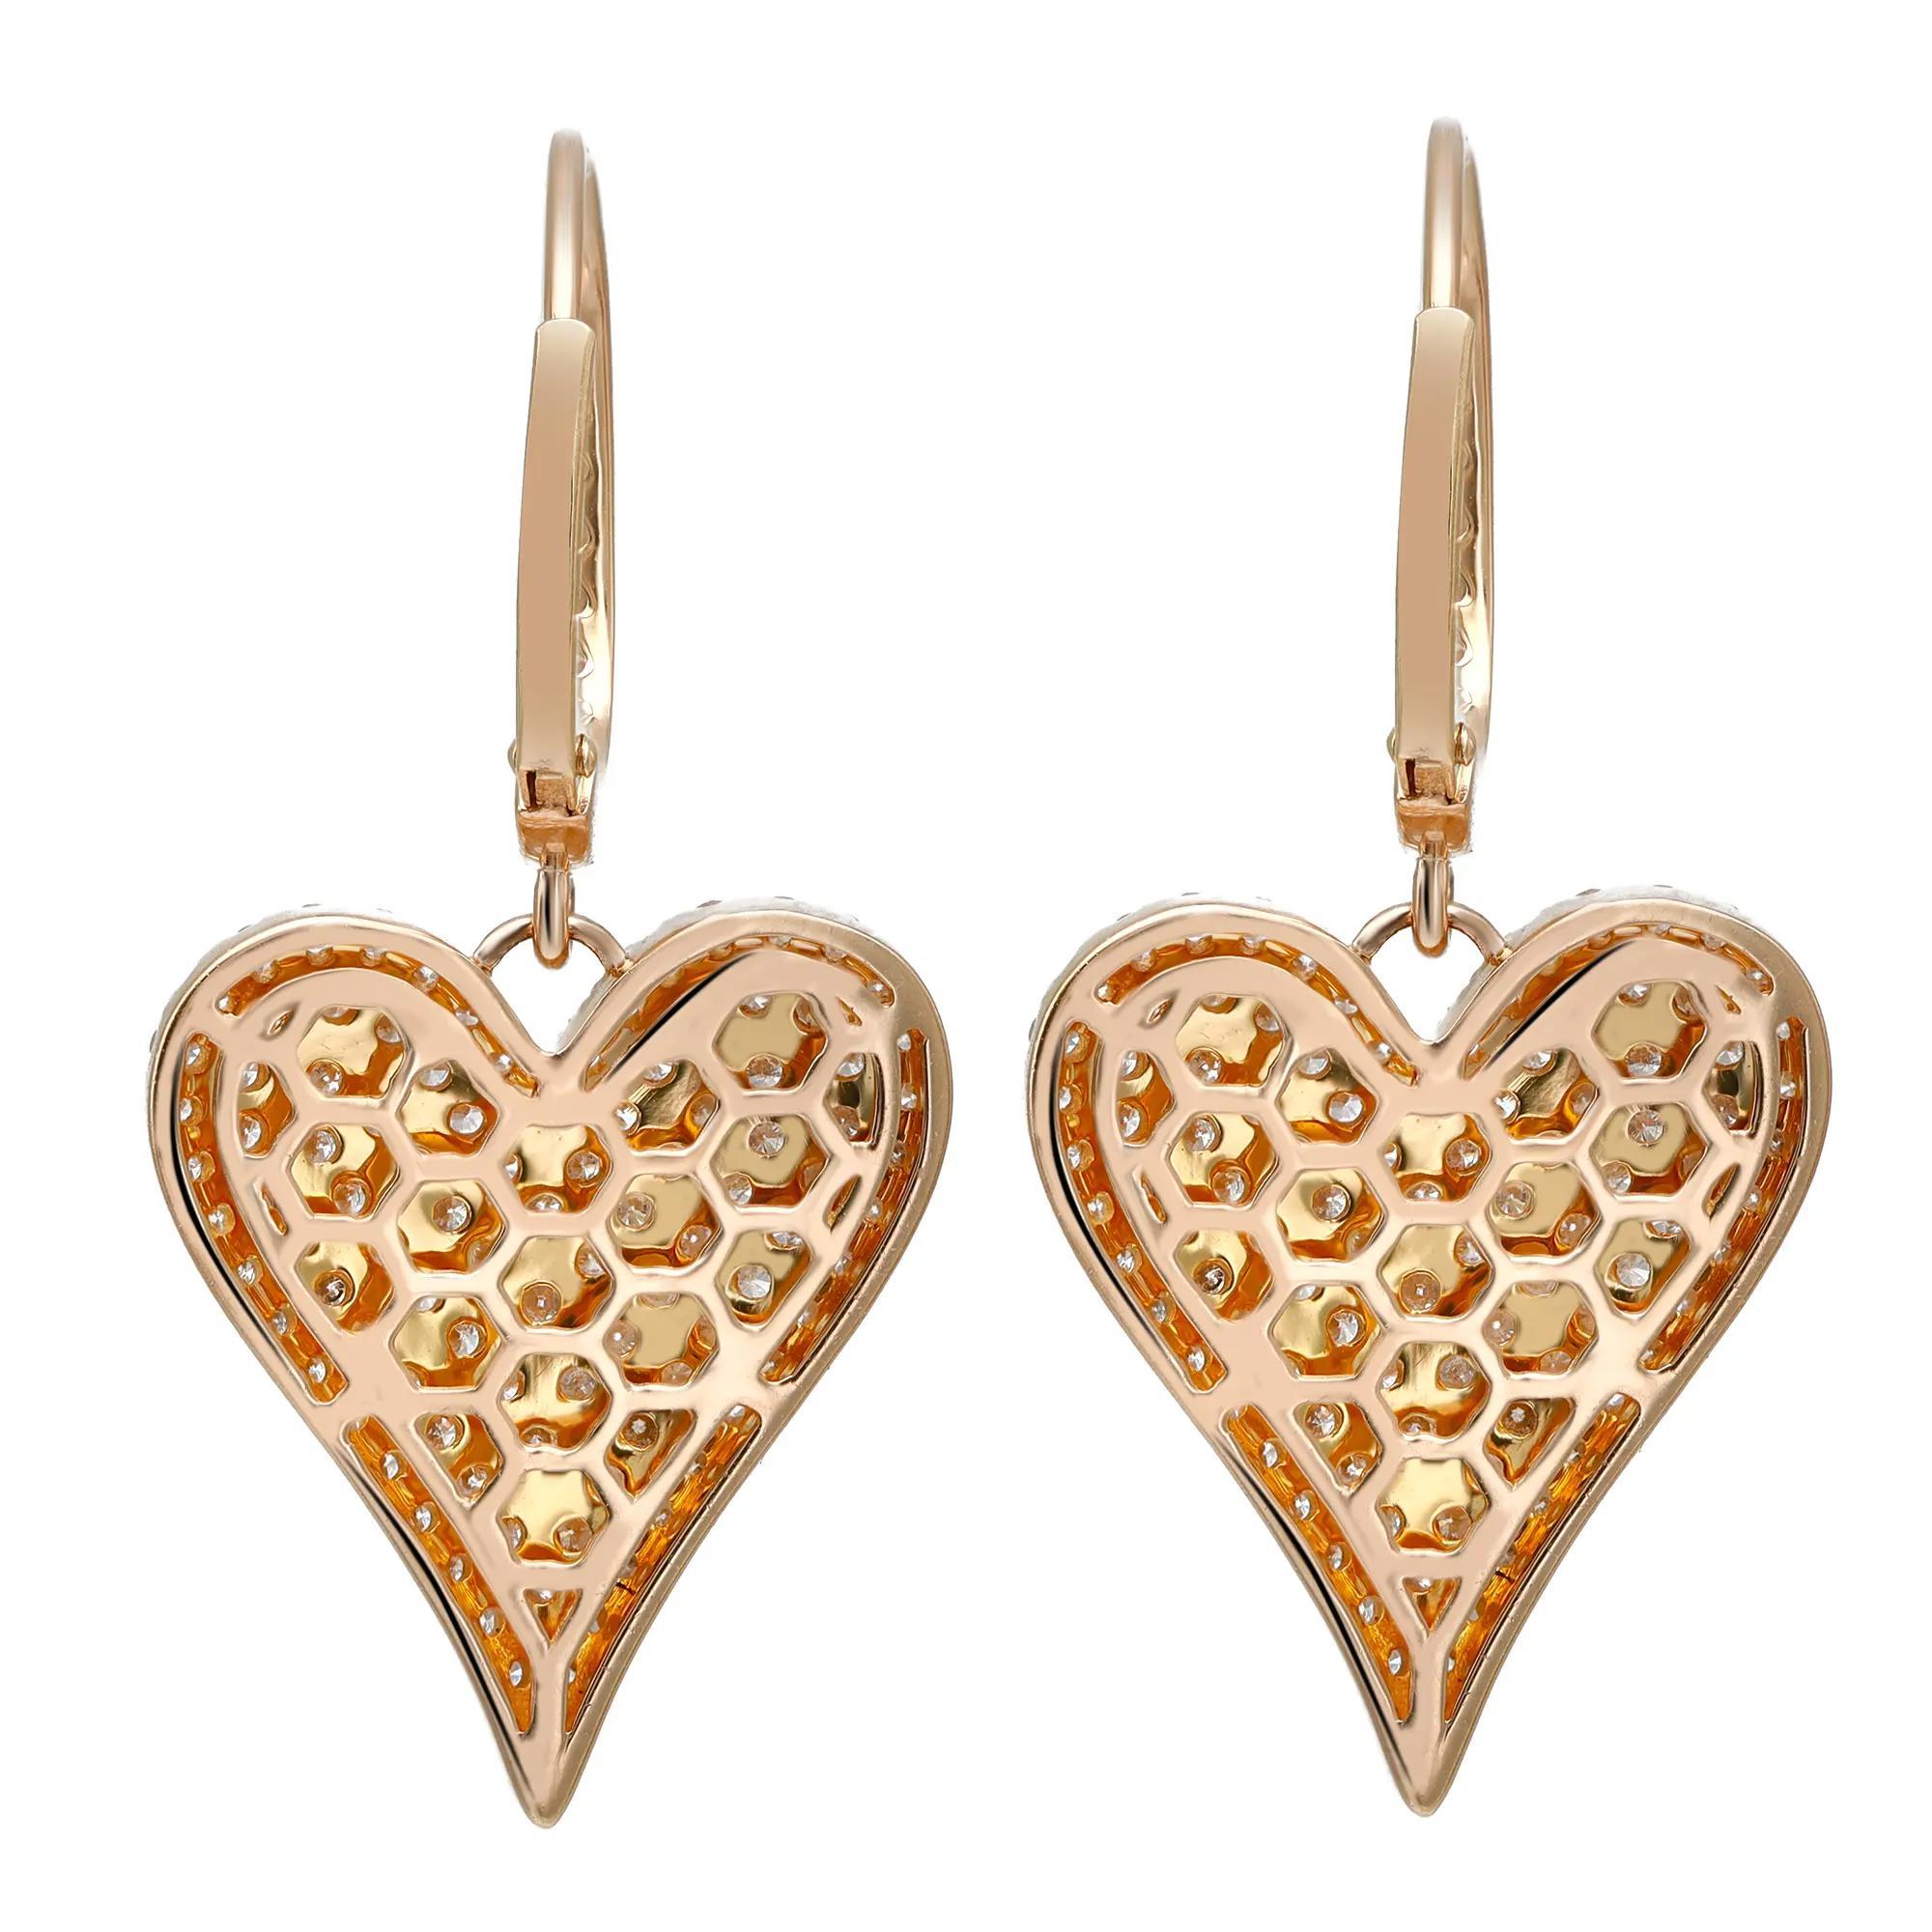 Fun and exquisite 14K yellow gold lightweight diamond drop earrings featuring pave set round brilliant cut diamonds set in a heart shape drop shank that dangle from a diamond studded hinged post. Total diamond weight: 2.00 carats. Diamond quality: